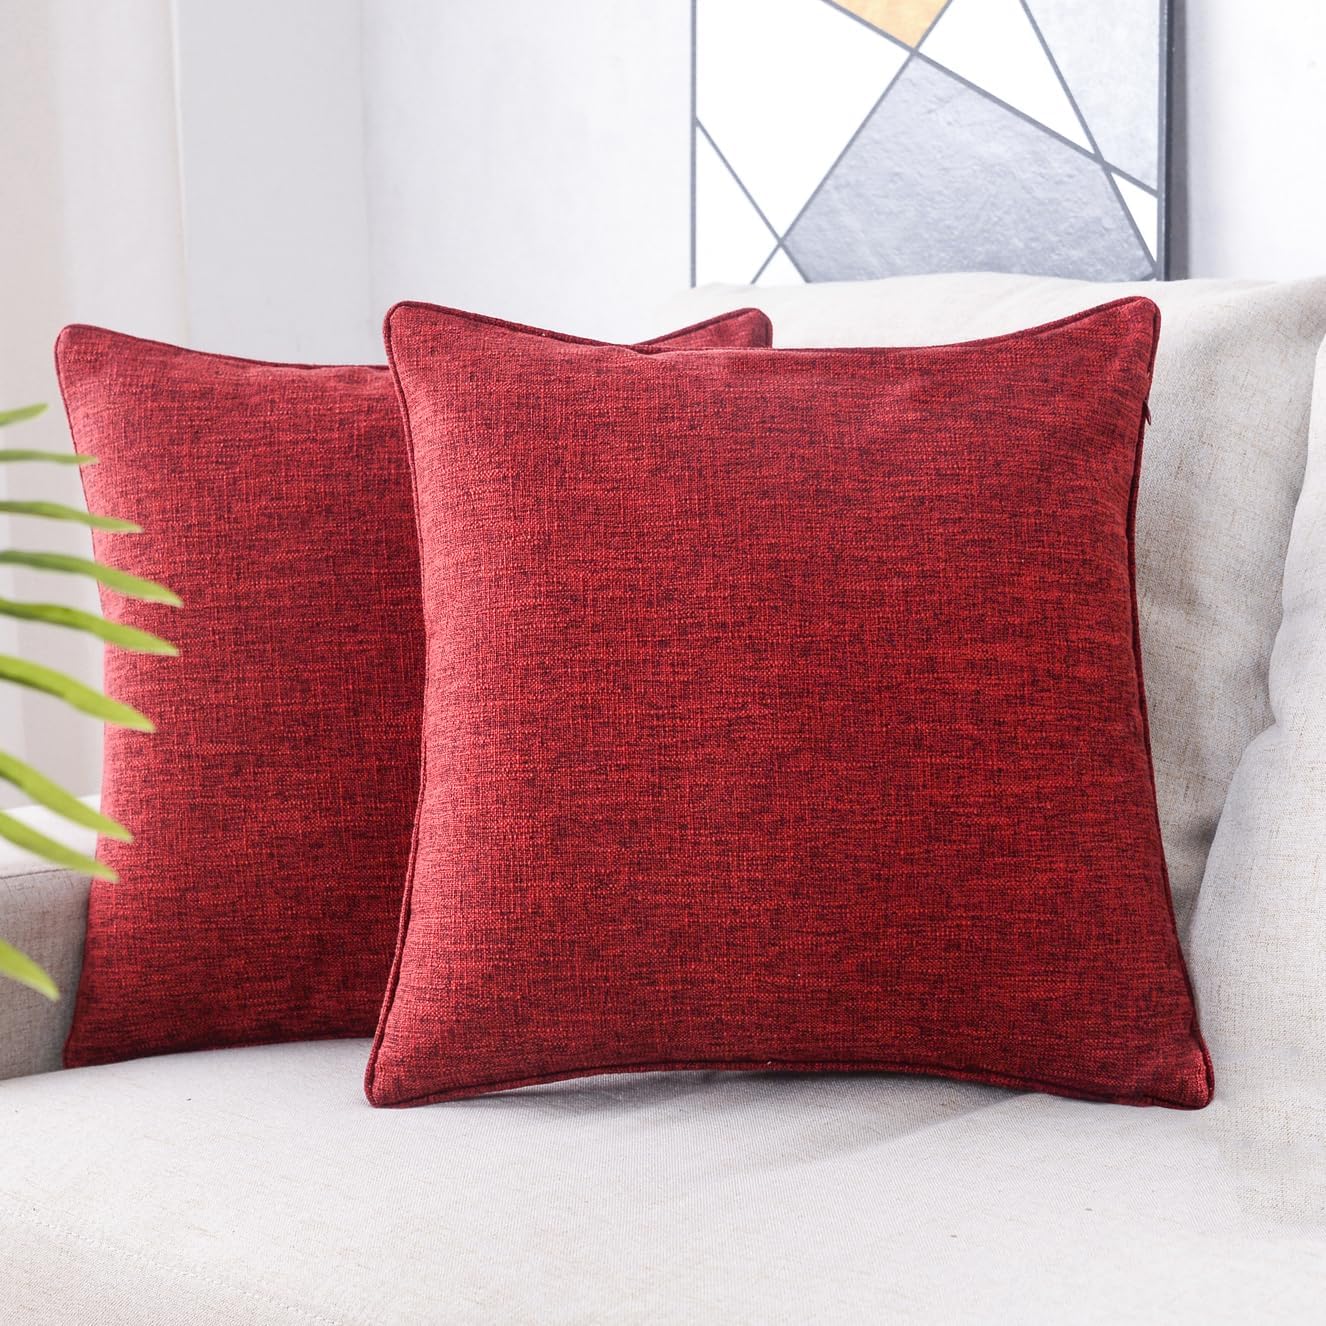 HPUK Linen Throw Pillow Covers Pack of 2, 18x18 Inch Accent Cushion Covers for Living Room, Bedroom, Decorative Solid Color Pillow Covers for Couch, Sofa, Chair, Wine